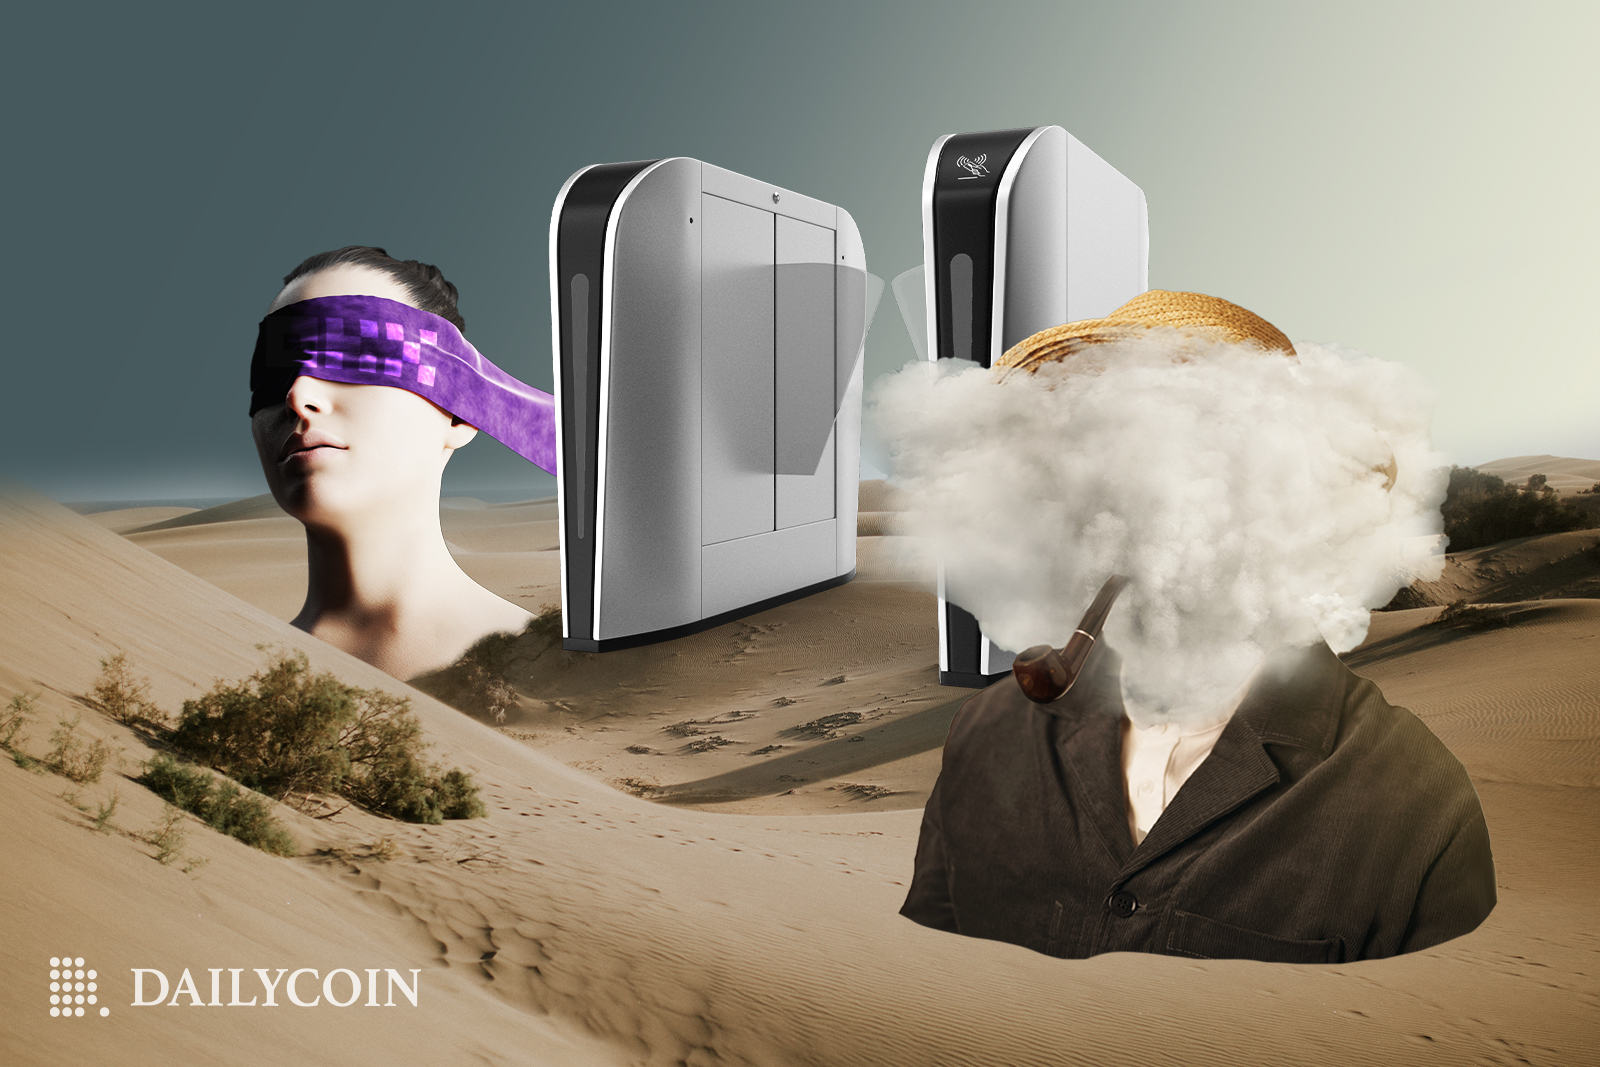 Two busts in the desert, one blindfolded and one with its head in the clouds, with two PlayStations.